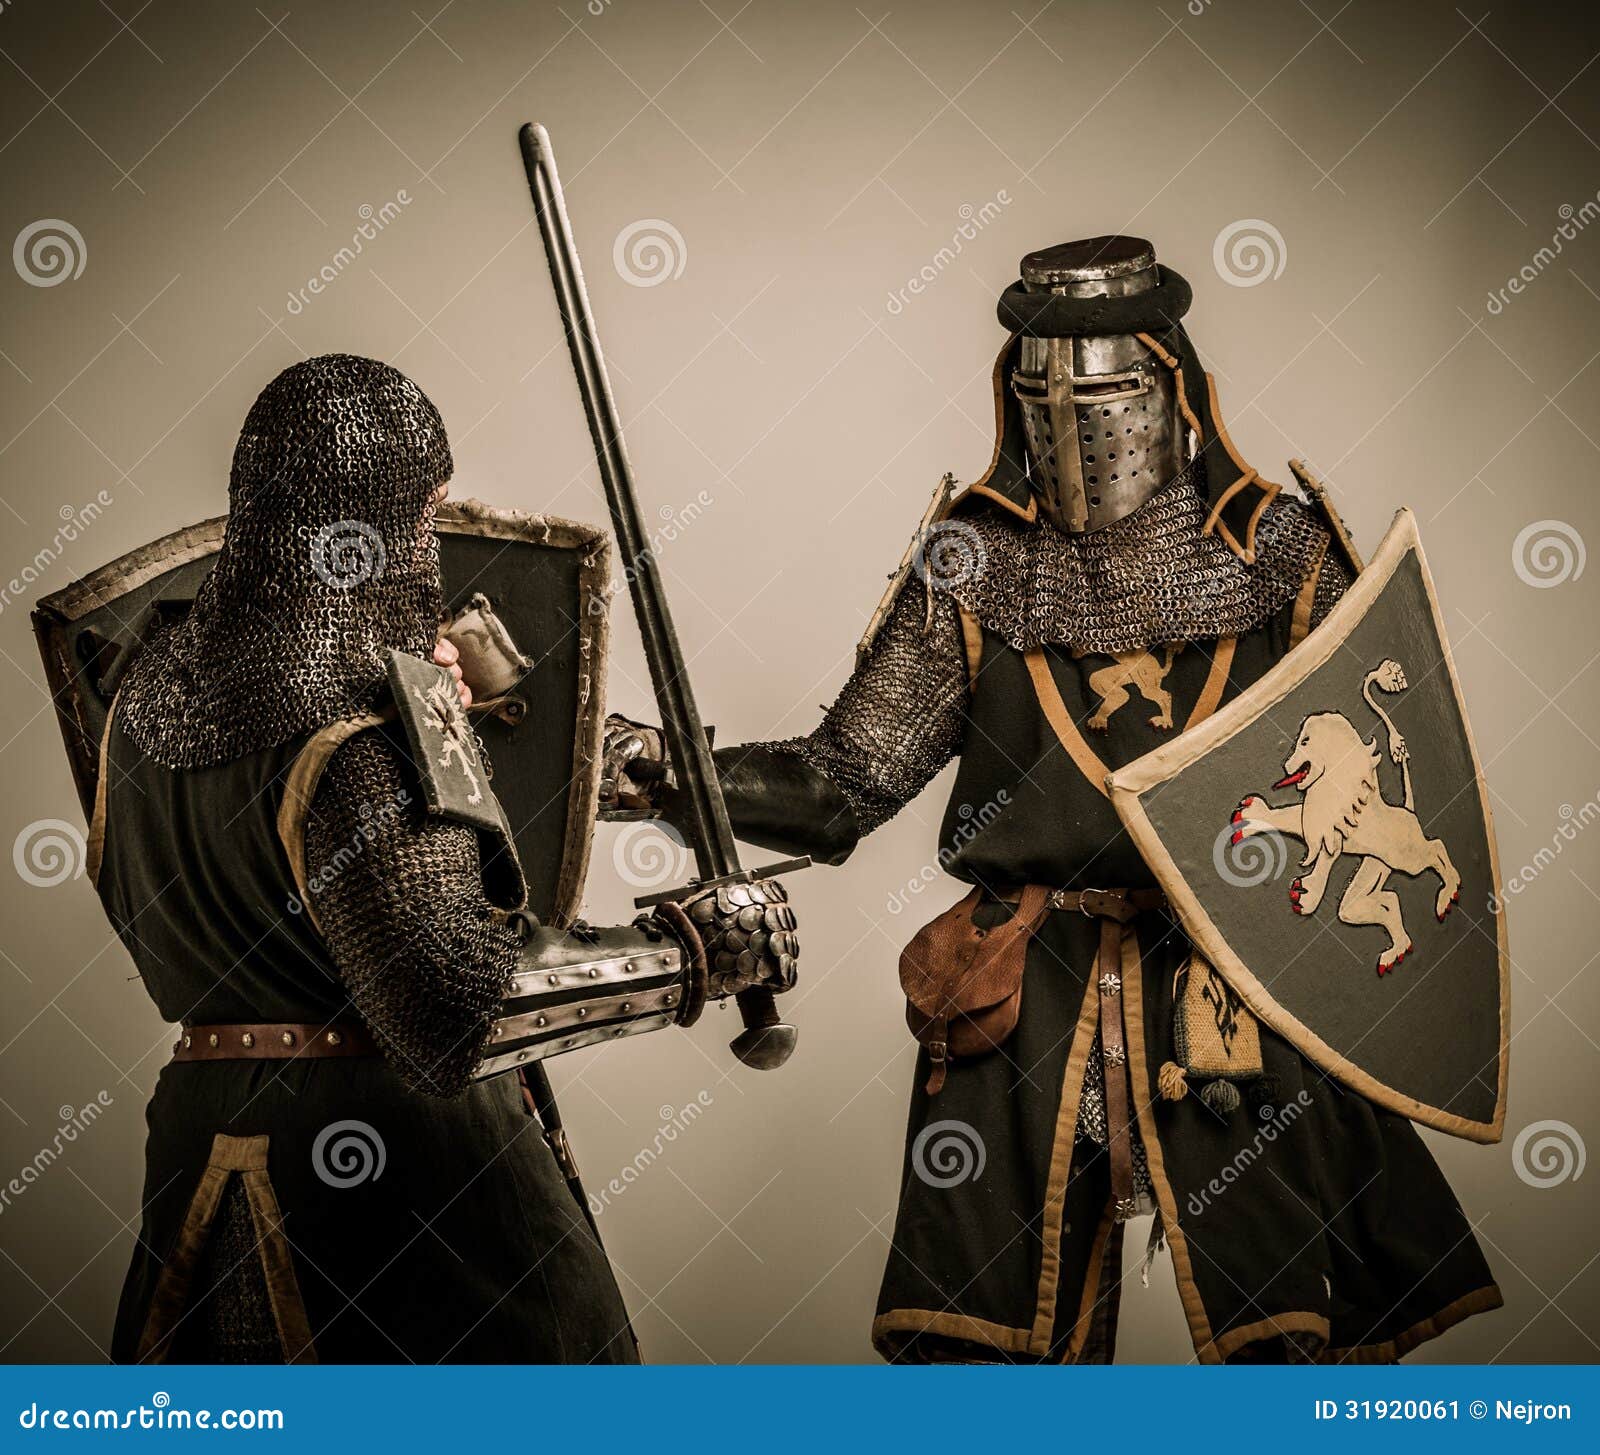 Knights In Full Body Armor Stock Image - Image: 31920061